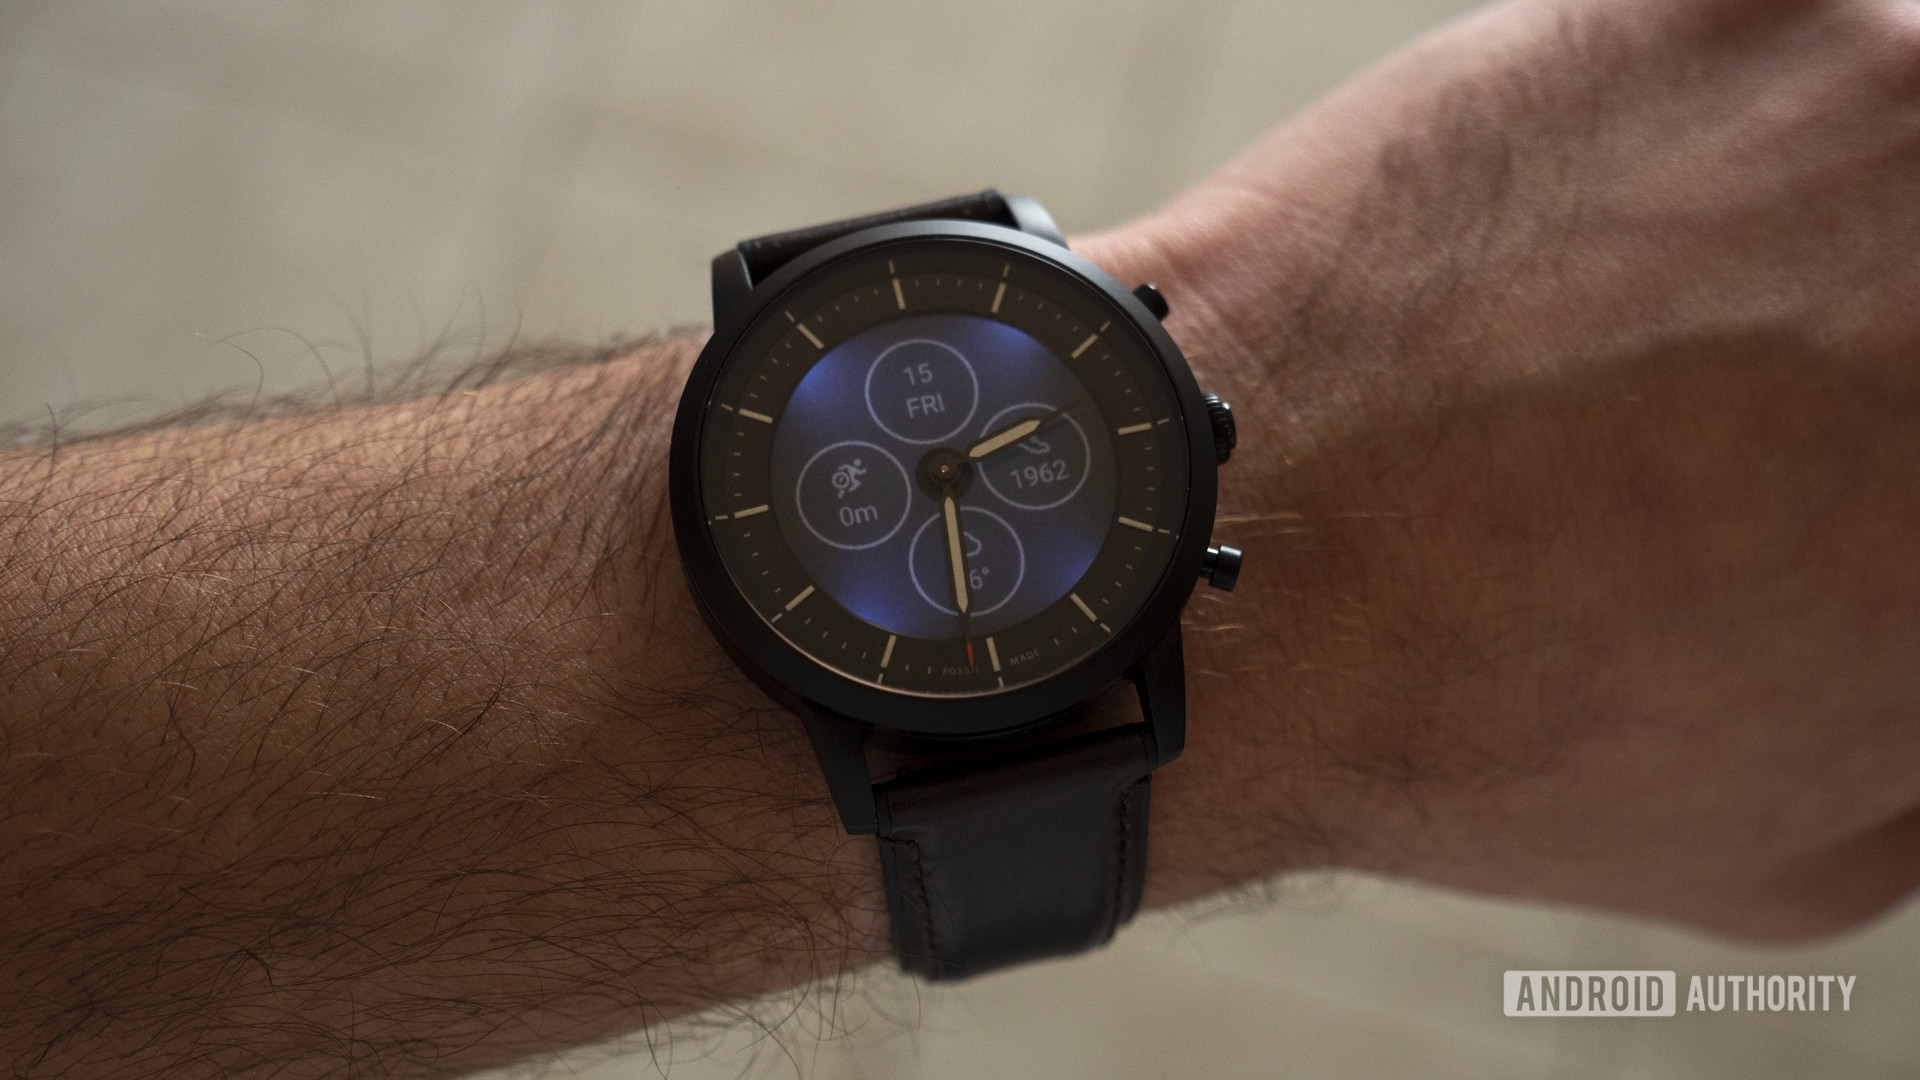 fossil hybrid hr review watch face collider hr on wrist backlight